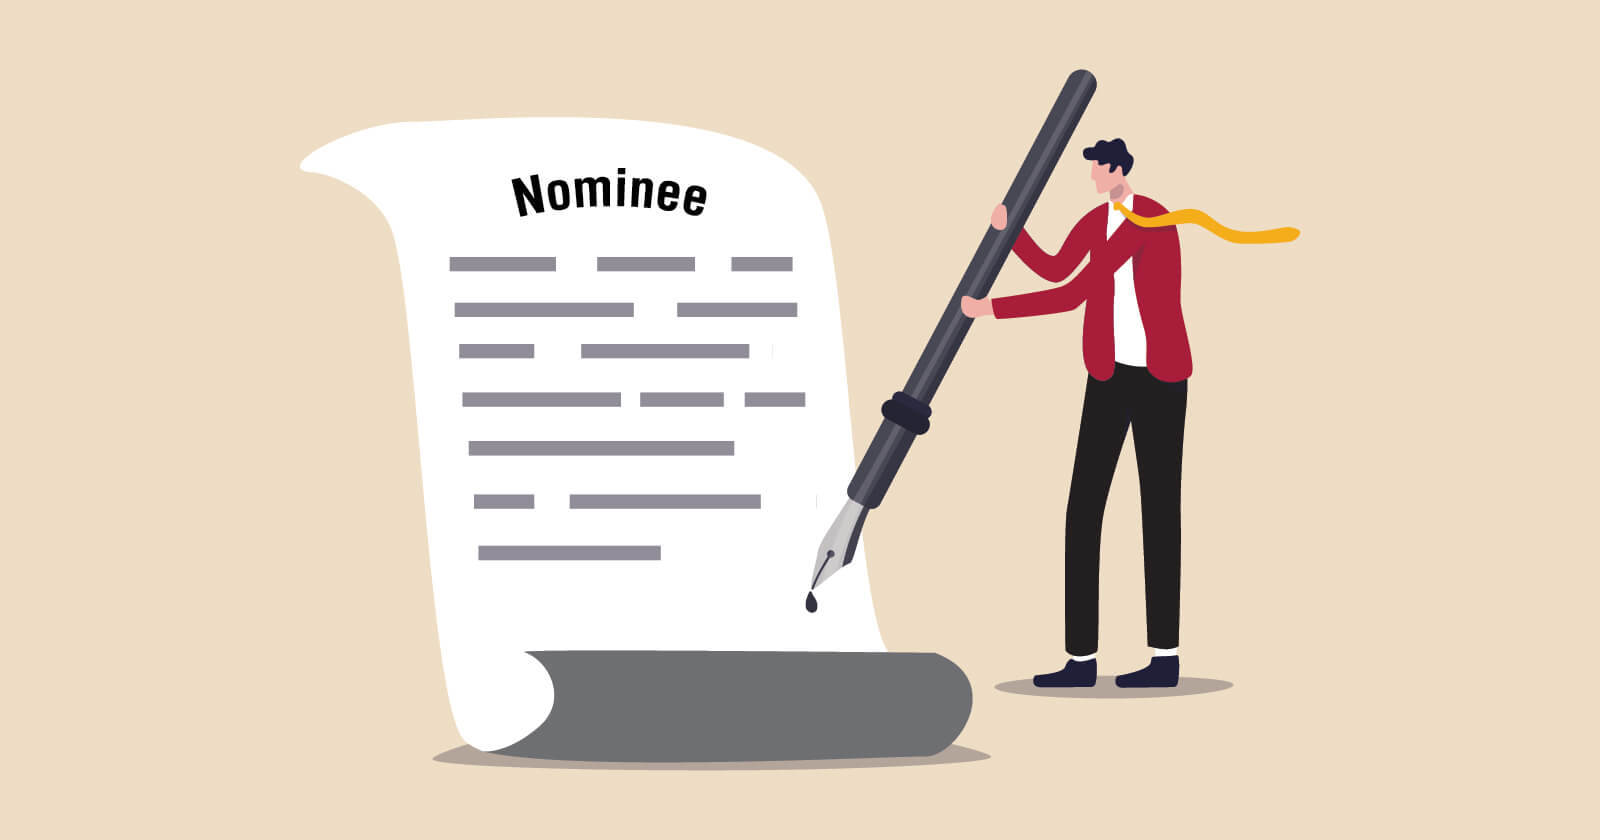 nomination and assignment in insurance